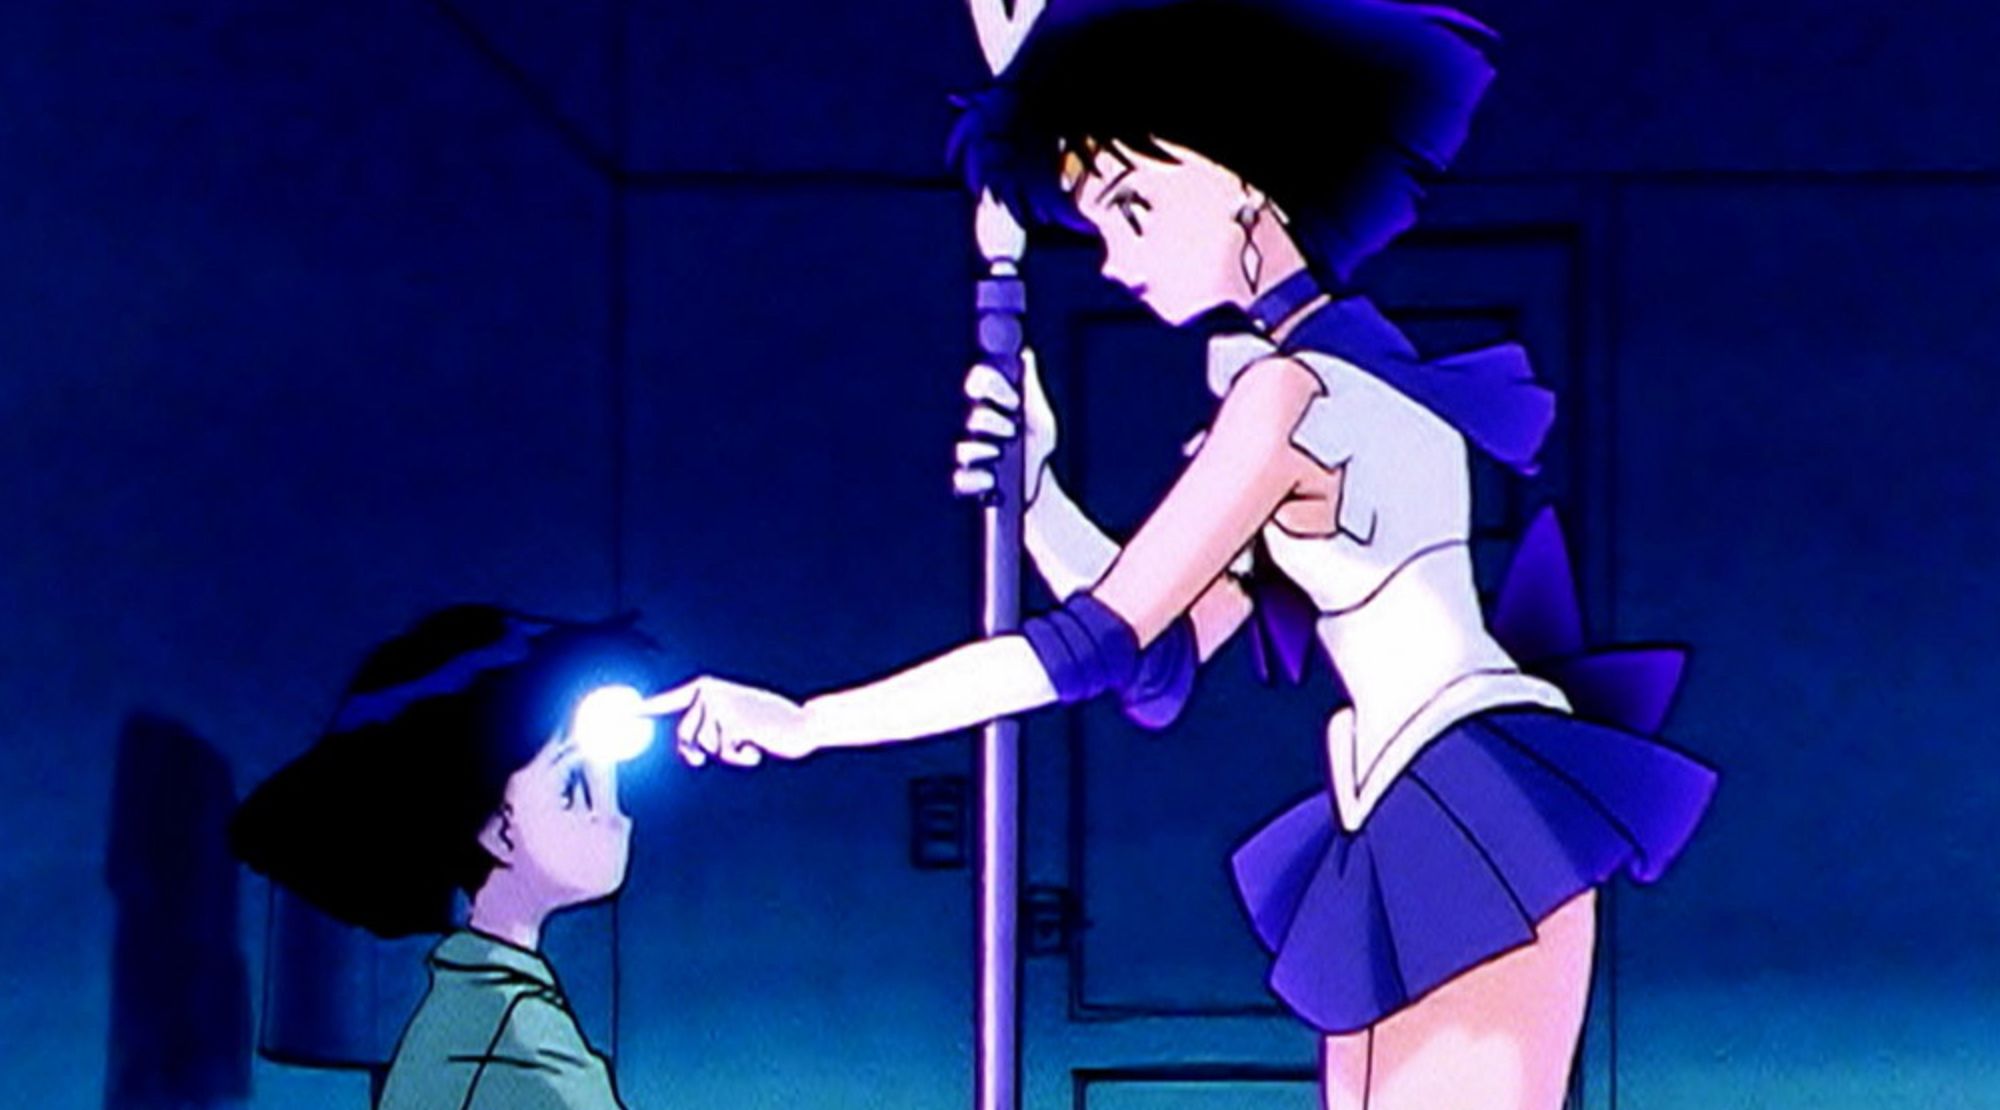 The form of Sailor Saturn touches Hotaru's forehead to awaken her memories in the 90s Sailor Moon anime